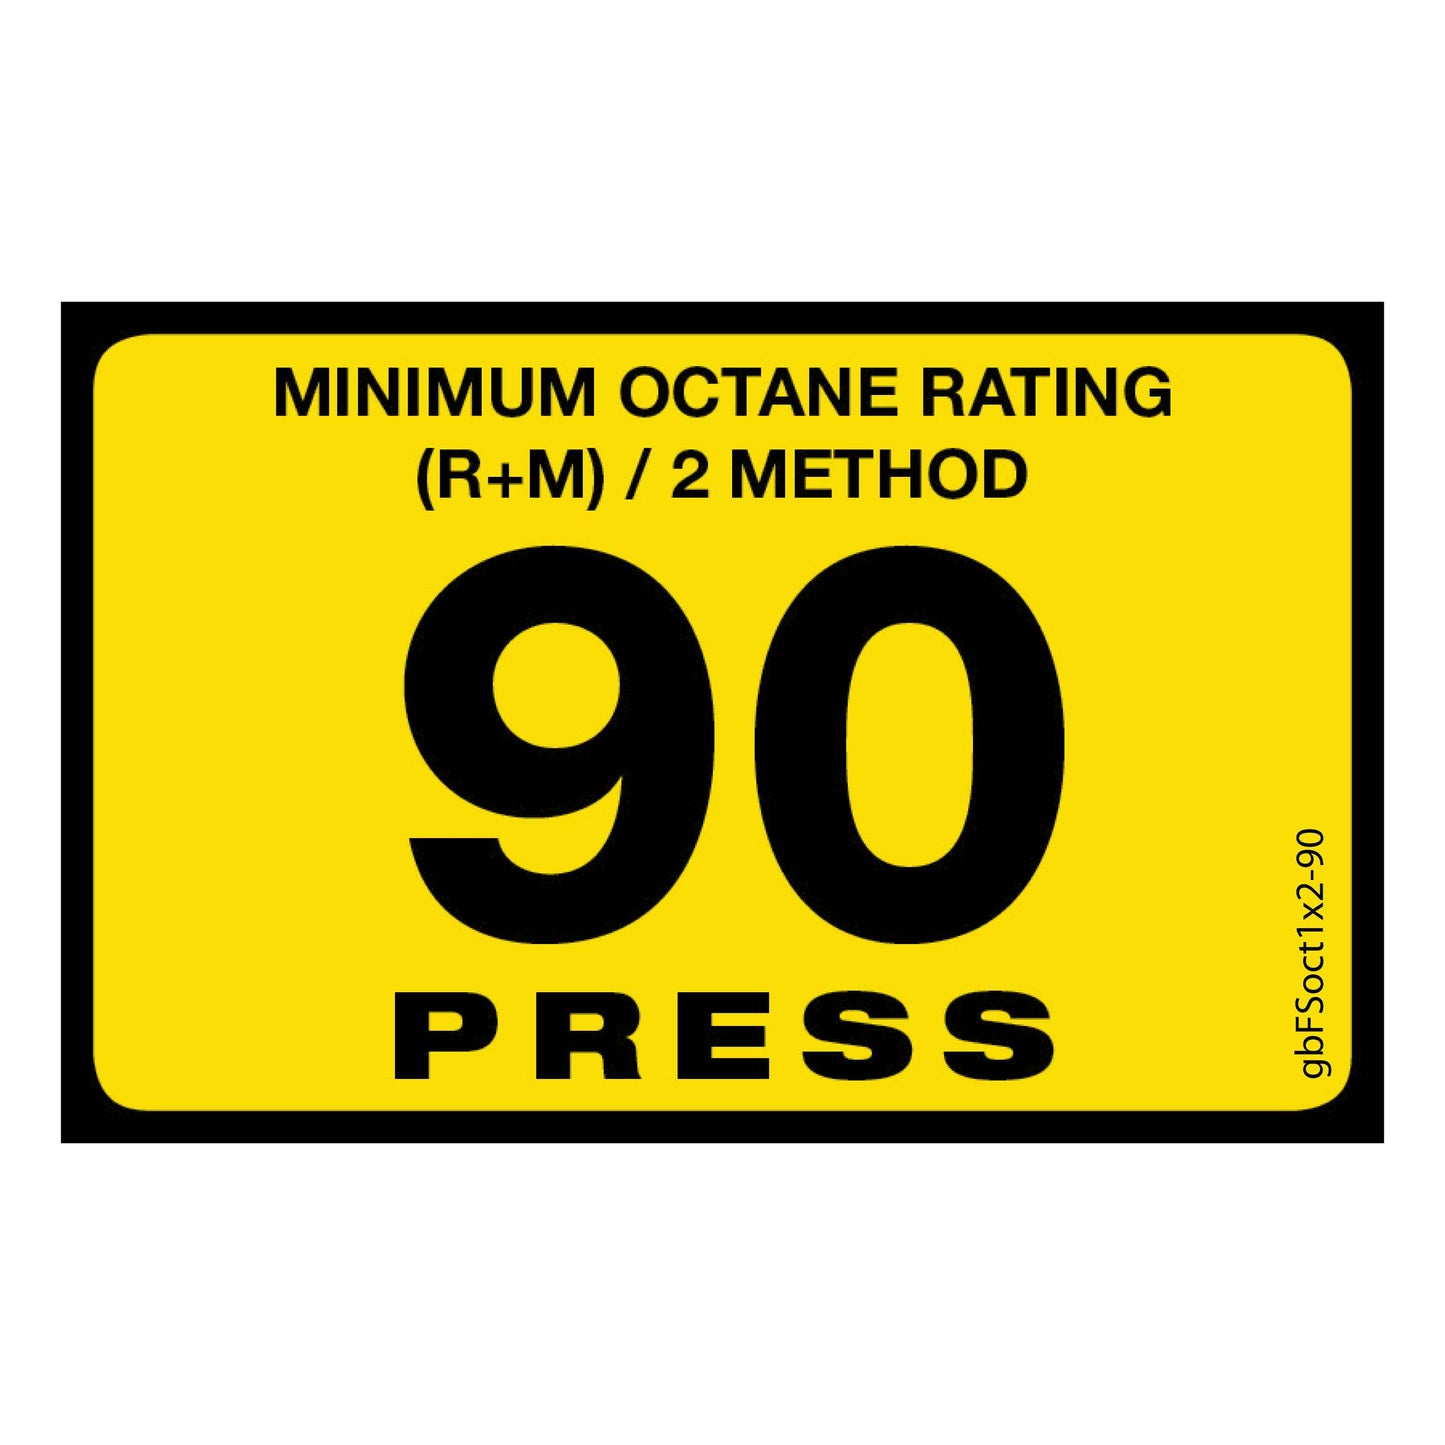 90 Press Octane Rating Decal. 1 inch by 2 inches in size. 